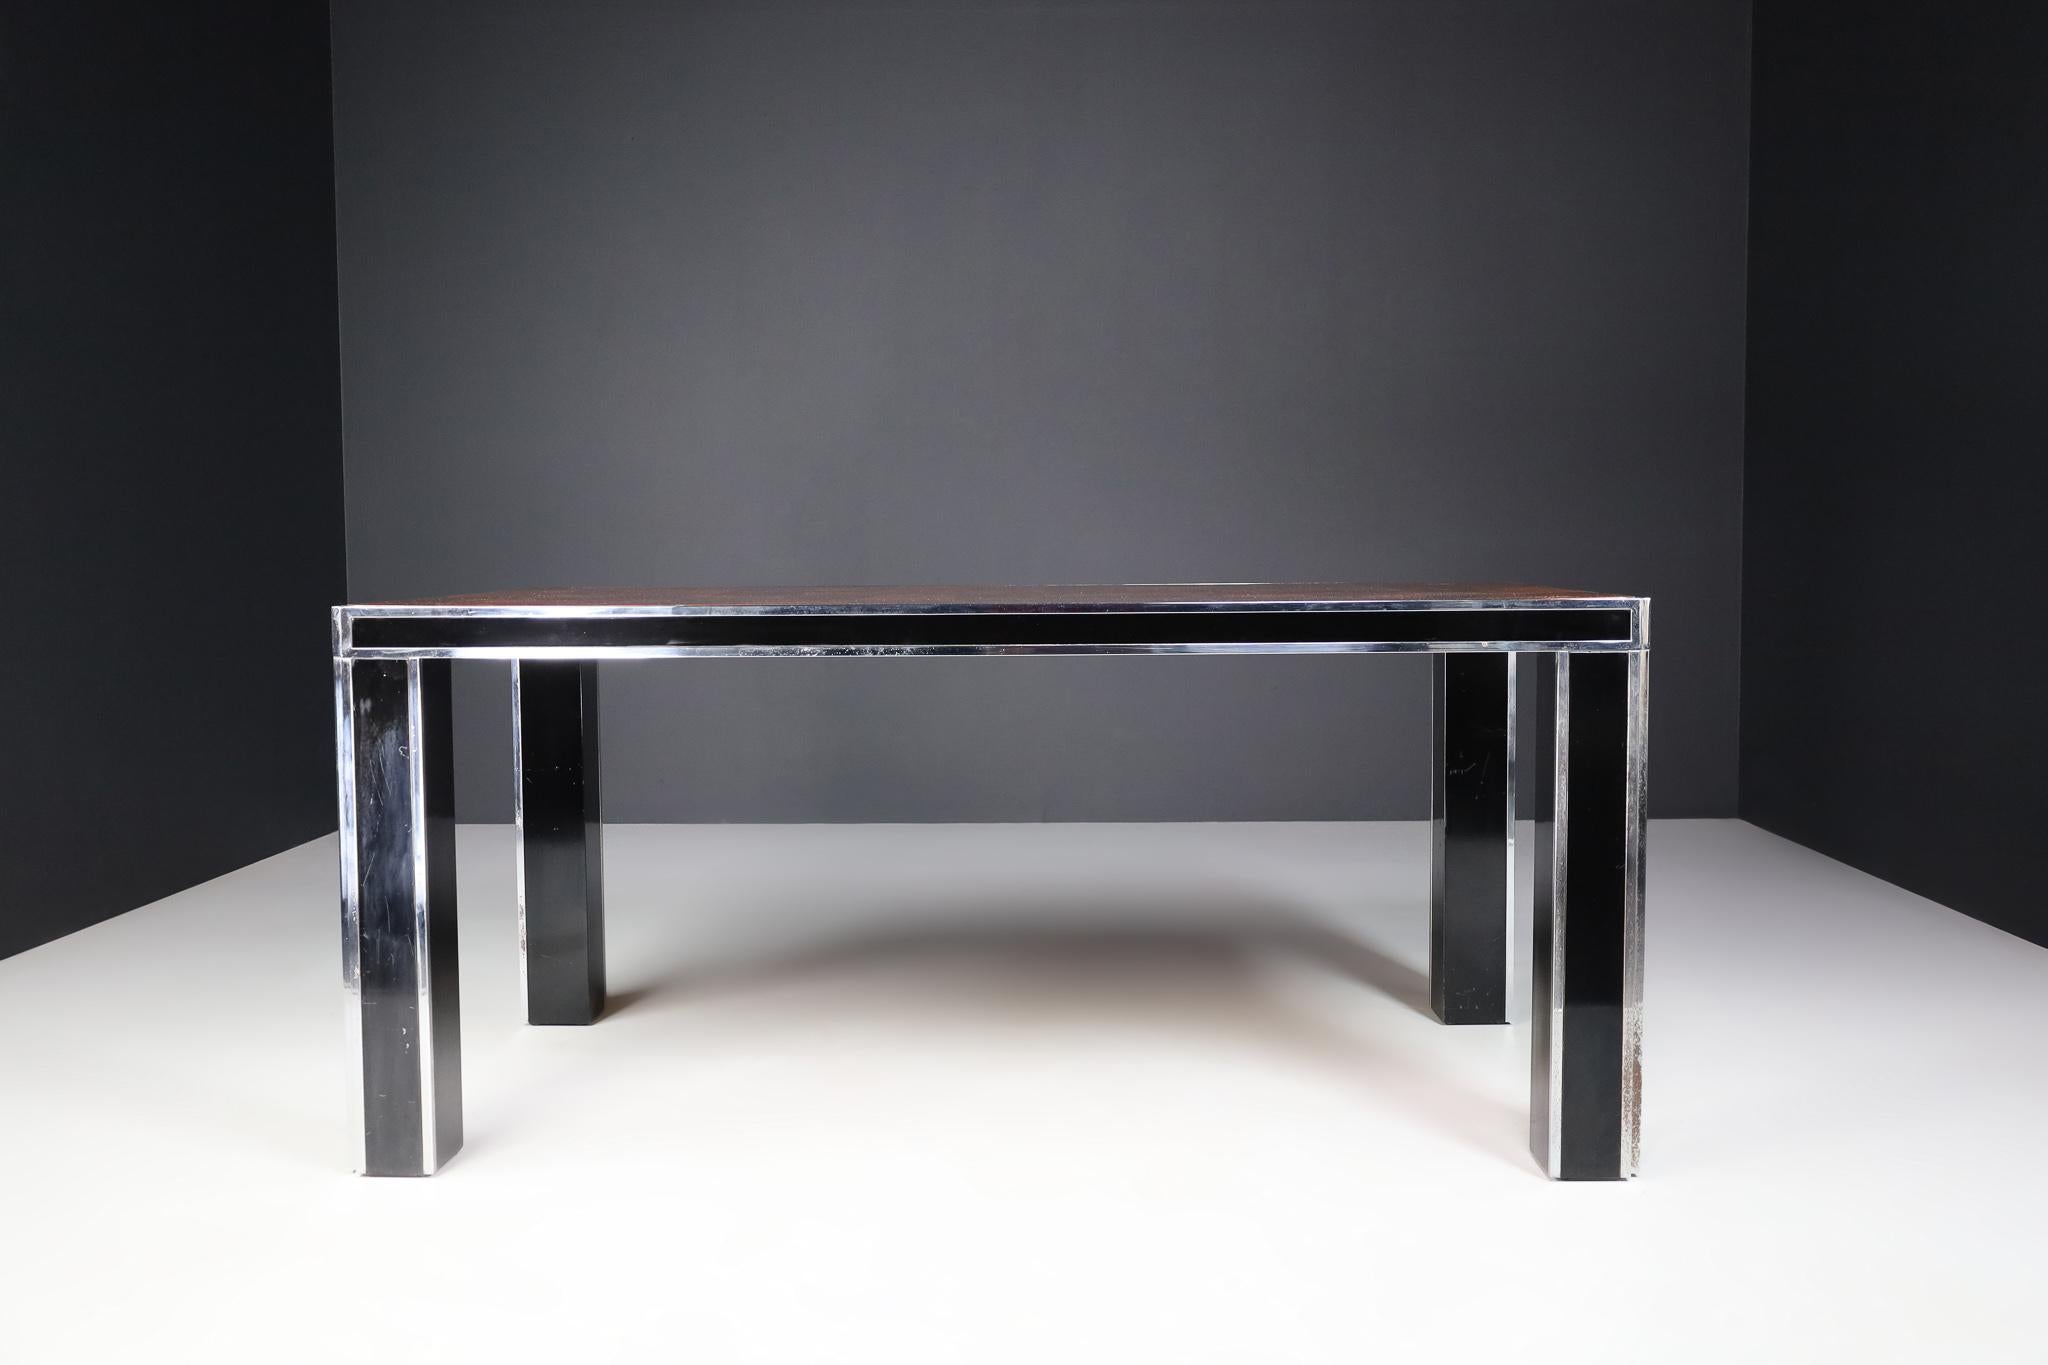 Mid-century italian burl dining table by Willy Rizzo 1970s.

Italian modern piece from the late 1970s Art Deco designed by Willy Rizzo. This stylish modern Italian dining table makes an elegant dining room with an impressive mixture of vintage